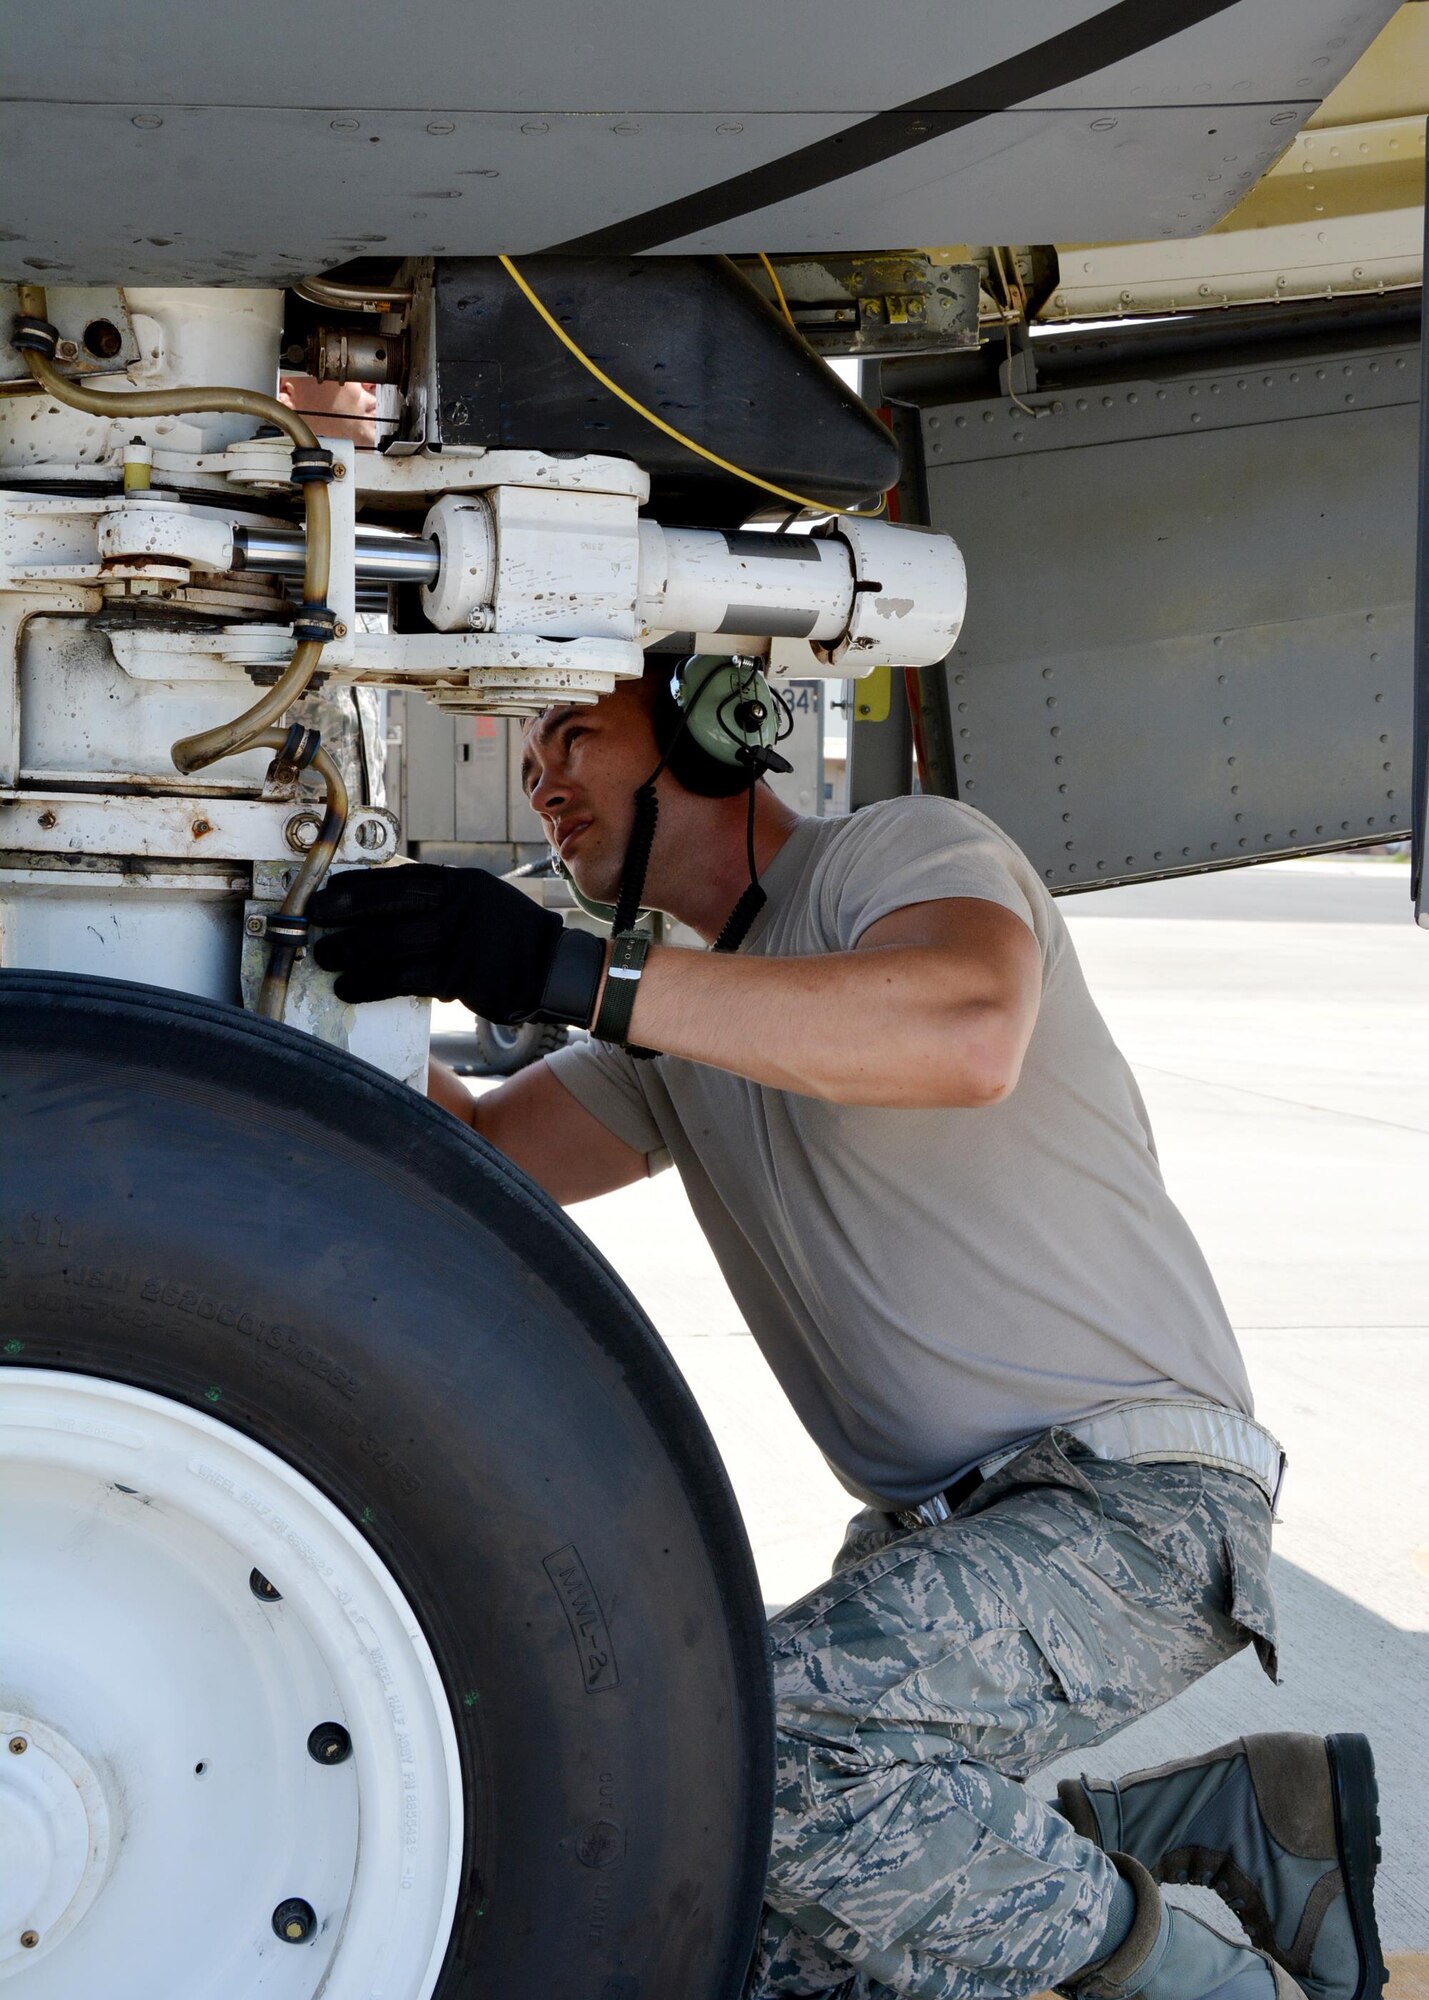 JOINT BASE PEARL HARBOR-HICKAM - Tech Sgt. Michael Dunning, crew chief with the 507th Aircraft Maintenance Squadron at Tinker Air Force Base, Okla., performs a nose landing gear inspection following an aerial refueling mission as part of Rim of the Pacific 2016. (U.S. Air Force photo\Tech. Sgt. Lauren Gleason)